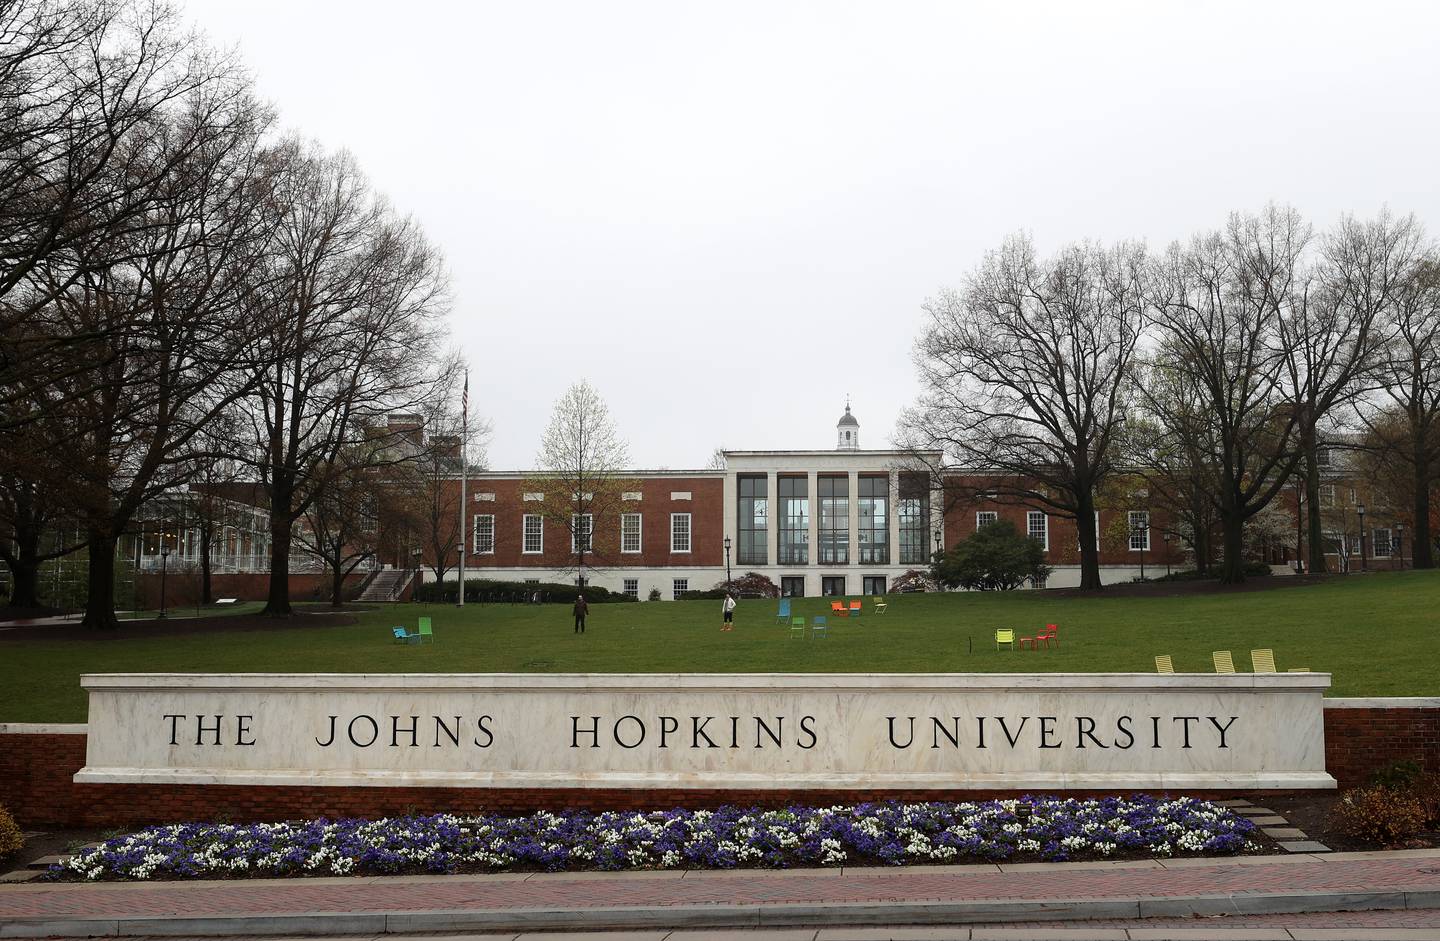 BALTIMORE, MARYLAND - MARCH 28: A general view of The Johns Hopkins University on March 28, 2020 in Baltimore, Maryland. The school is shut down due to the coronavirus (COVID-19) outbreak.